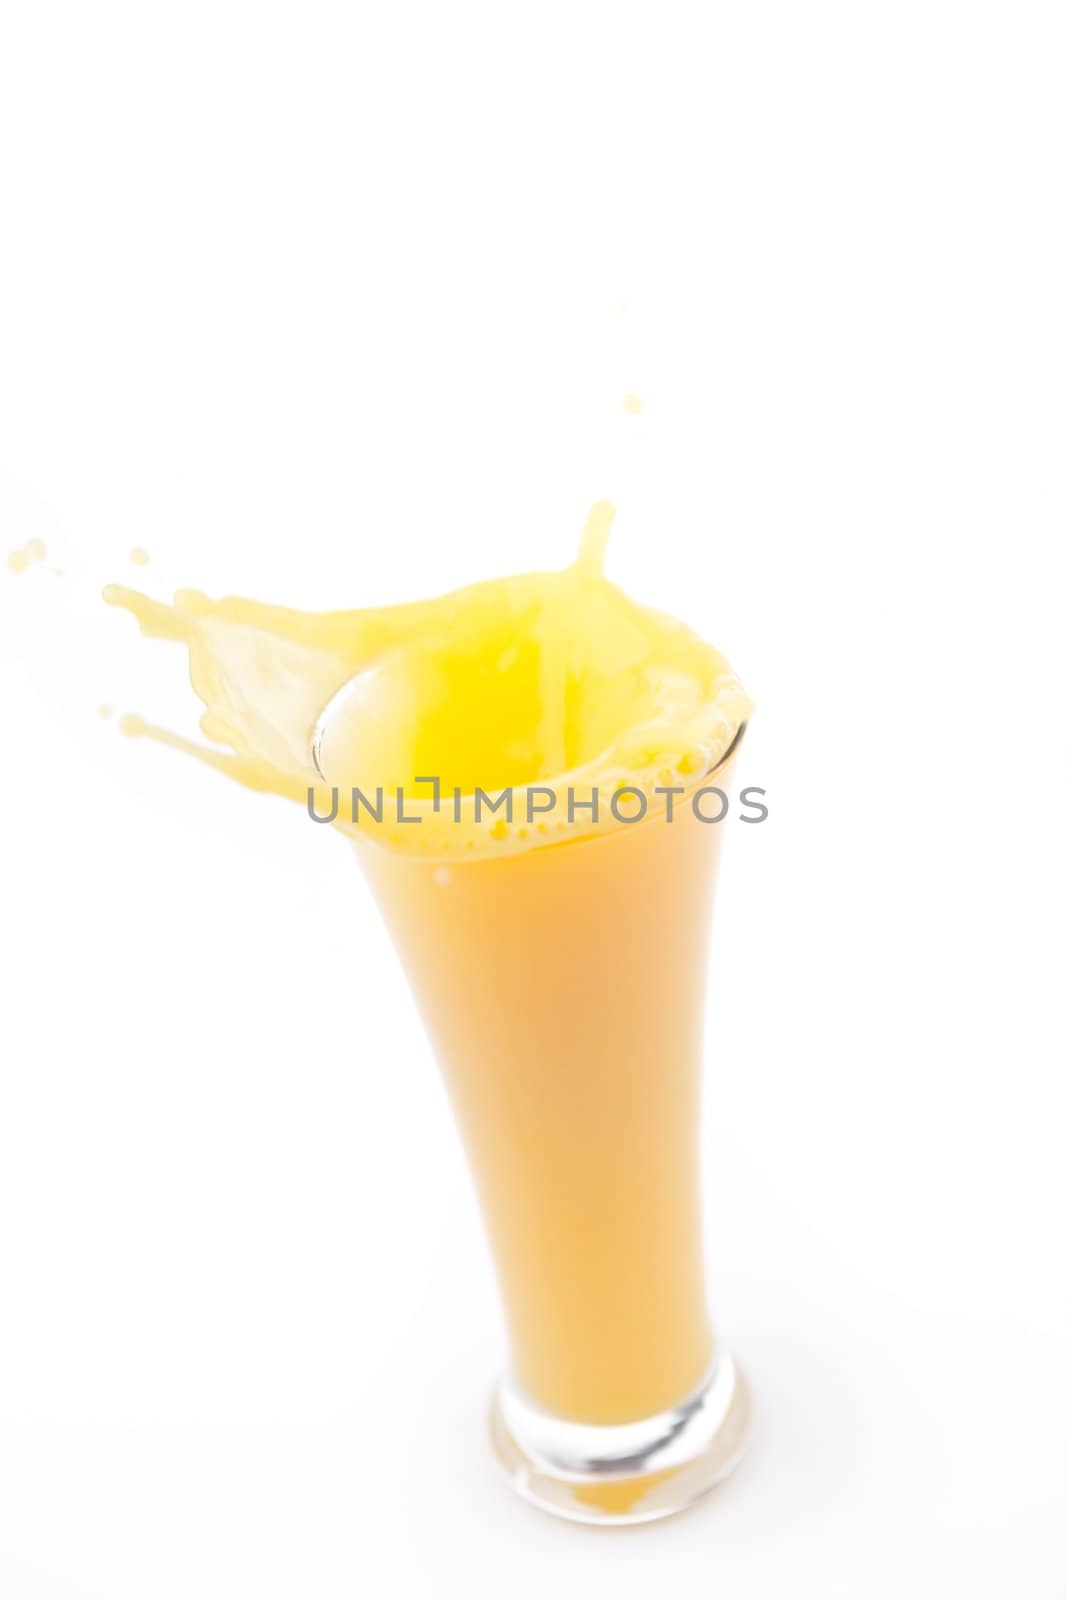 Overlowing glass of orange juice against white background